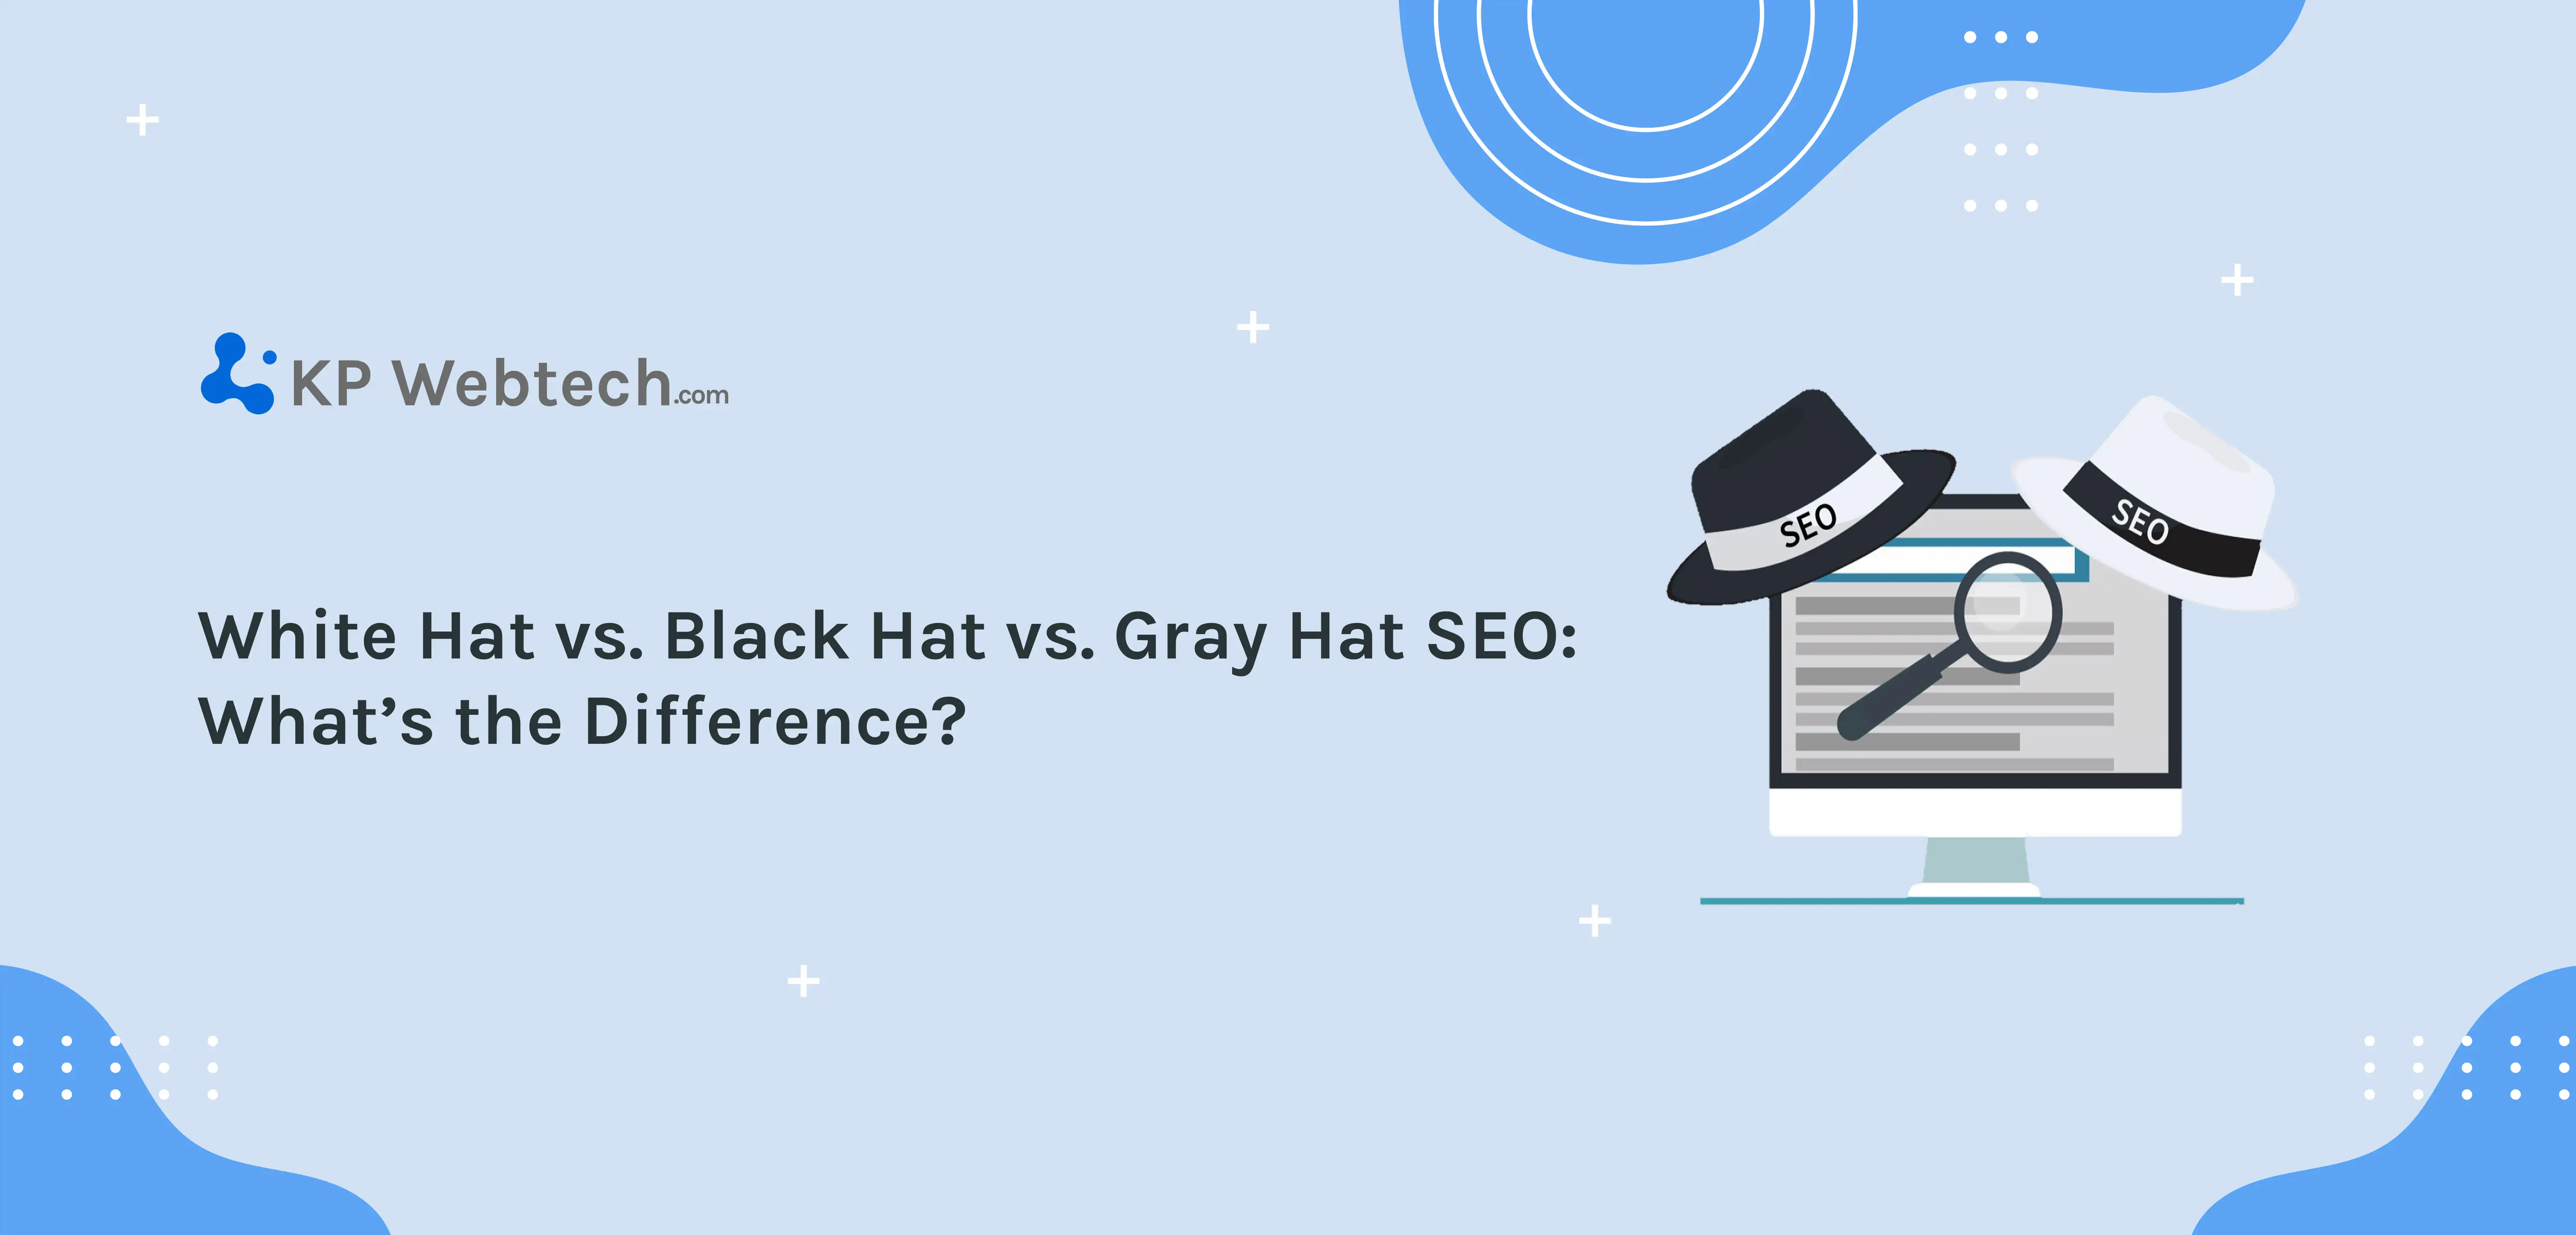 Black hat, white hat and gray hat SEO. How do they differ and what do they mean for your SEO approach